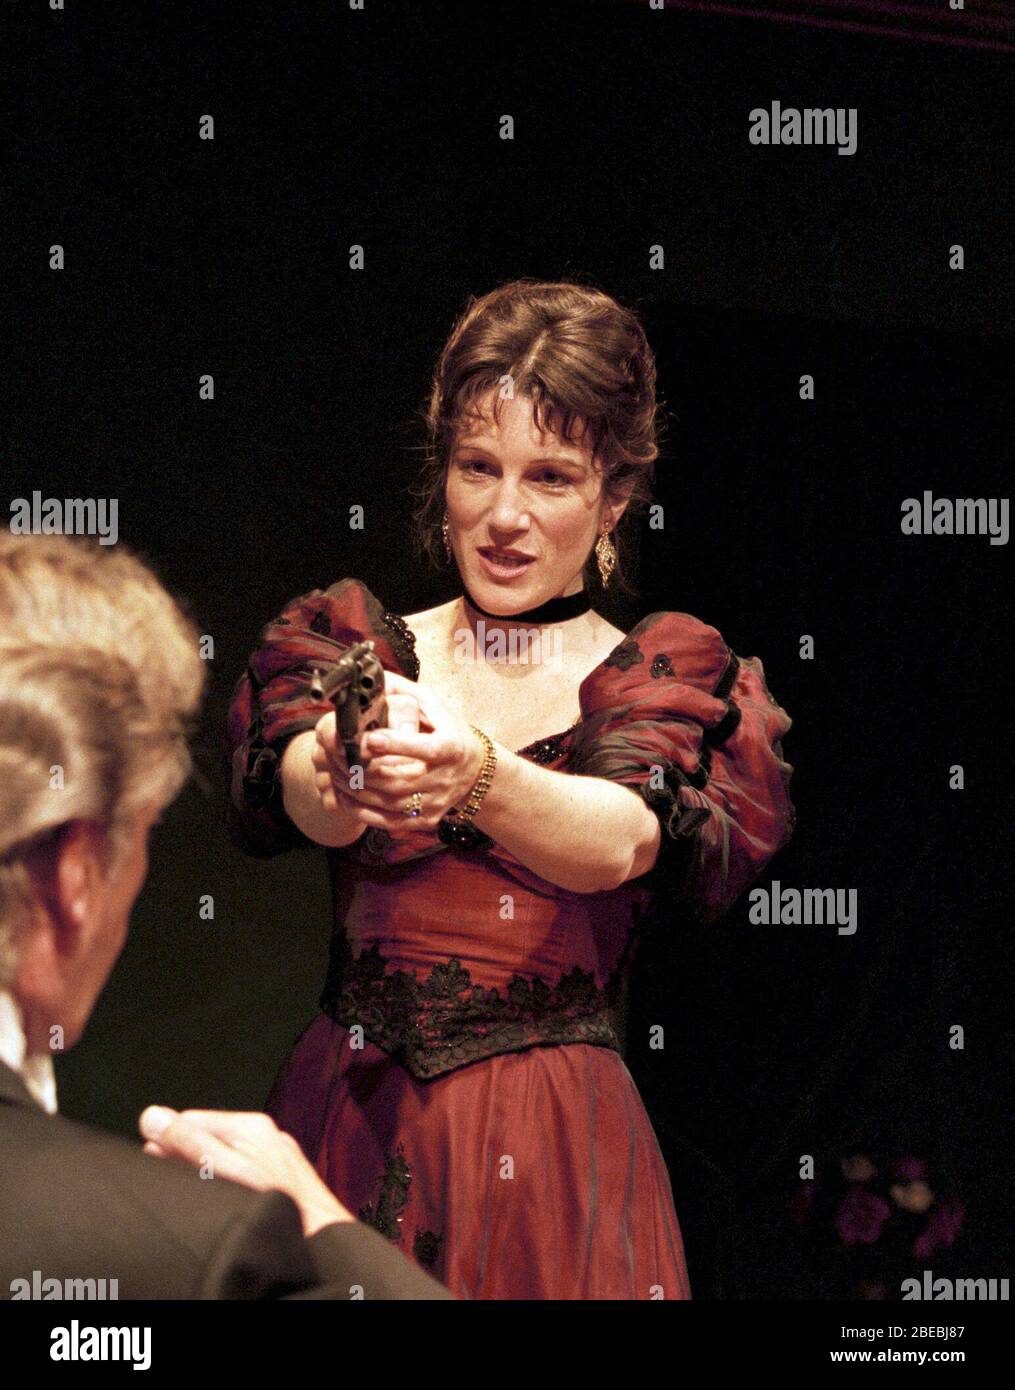 Harriet Walter (Hedda Tesman), Peter Blythe (Judge Brack) in HEDDA GABLER by Ibsen at the Minerva Theatre, Chichester Festival Theatre, West Sussex, England in 1996 design: Isabella Bywater lighting: Nick Beadle director: Lindy Davies Stock Photo